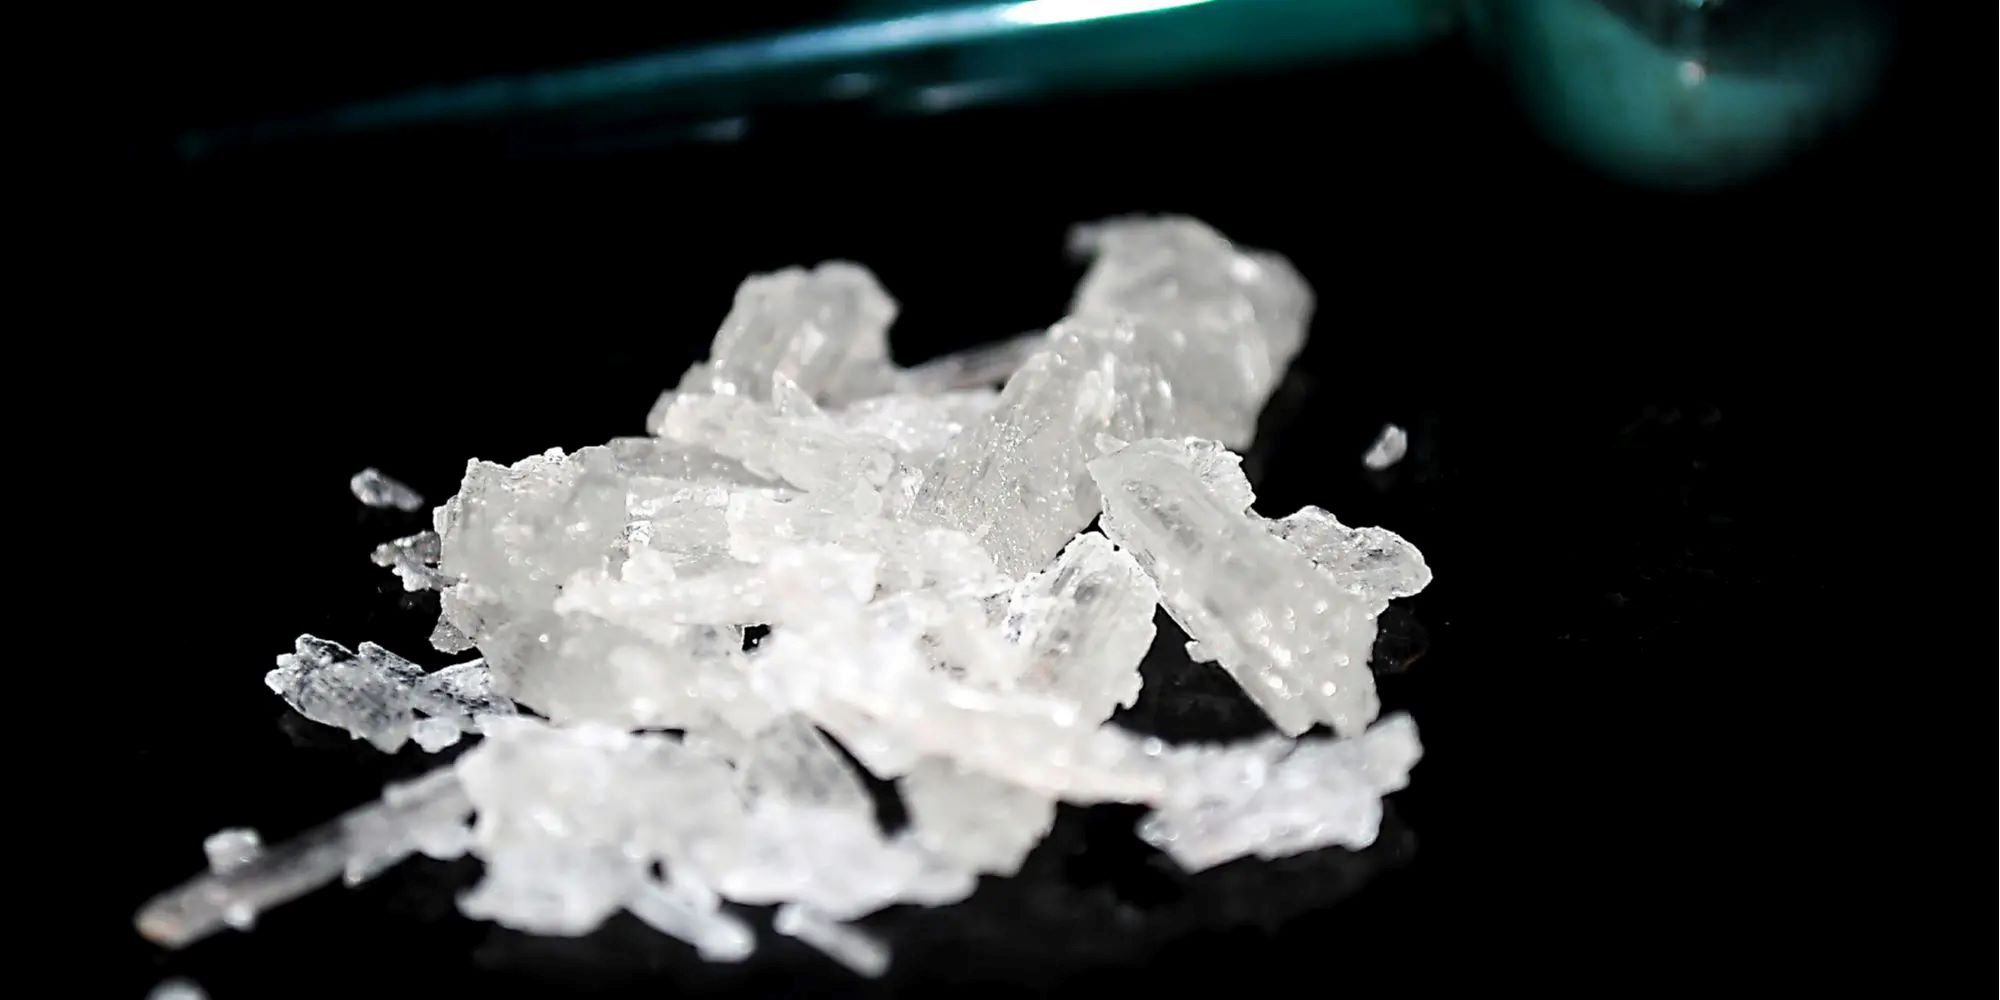 20-interesting-facts-about-meth